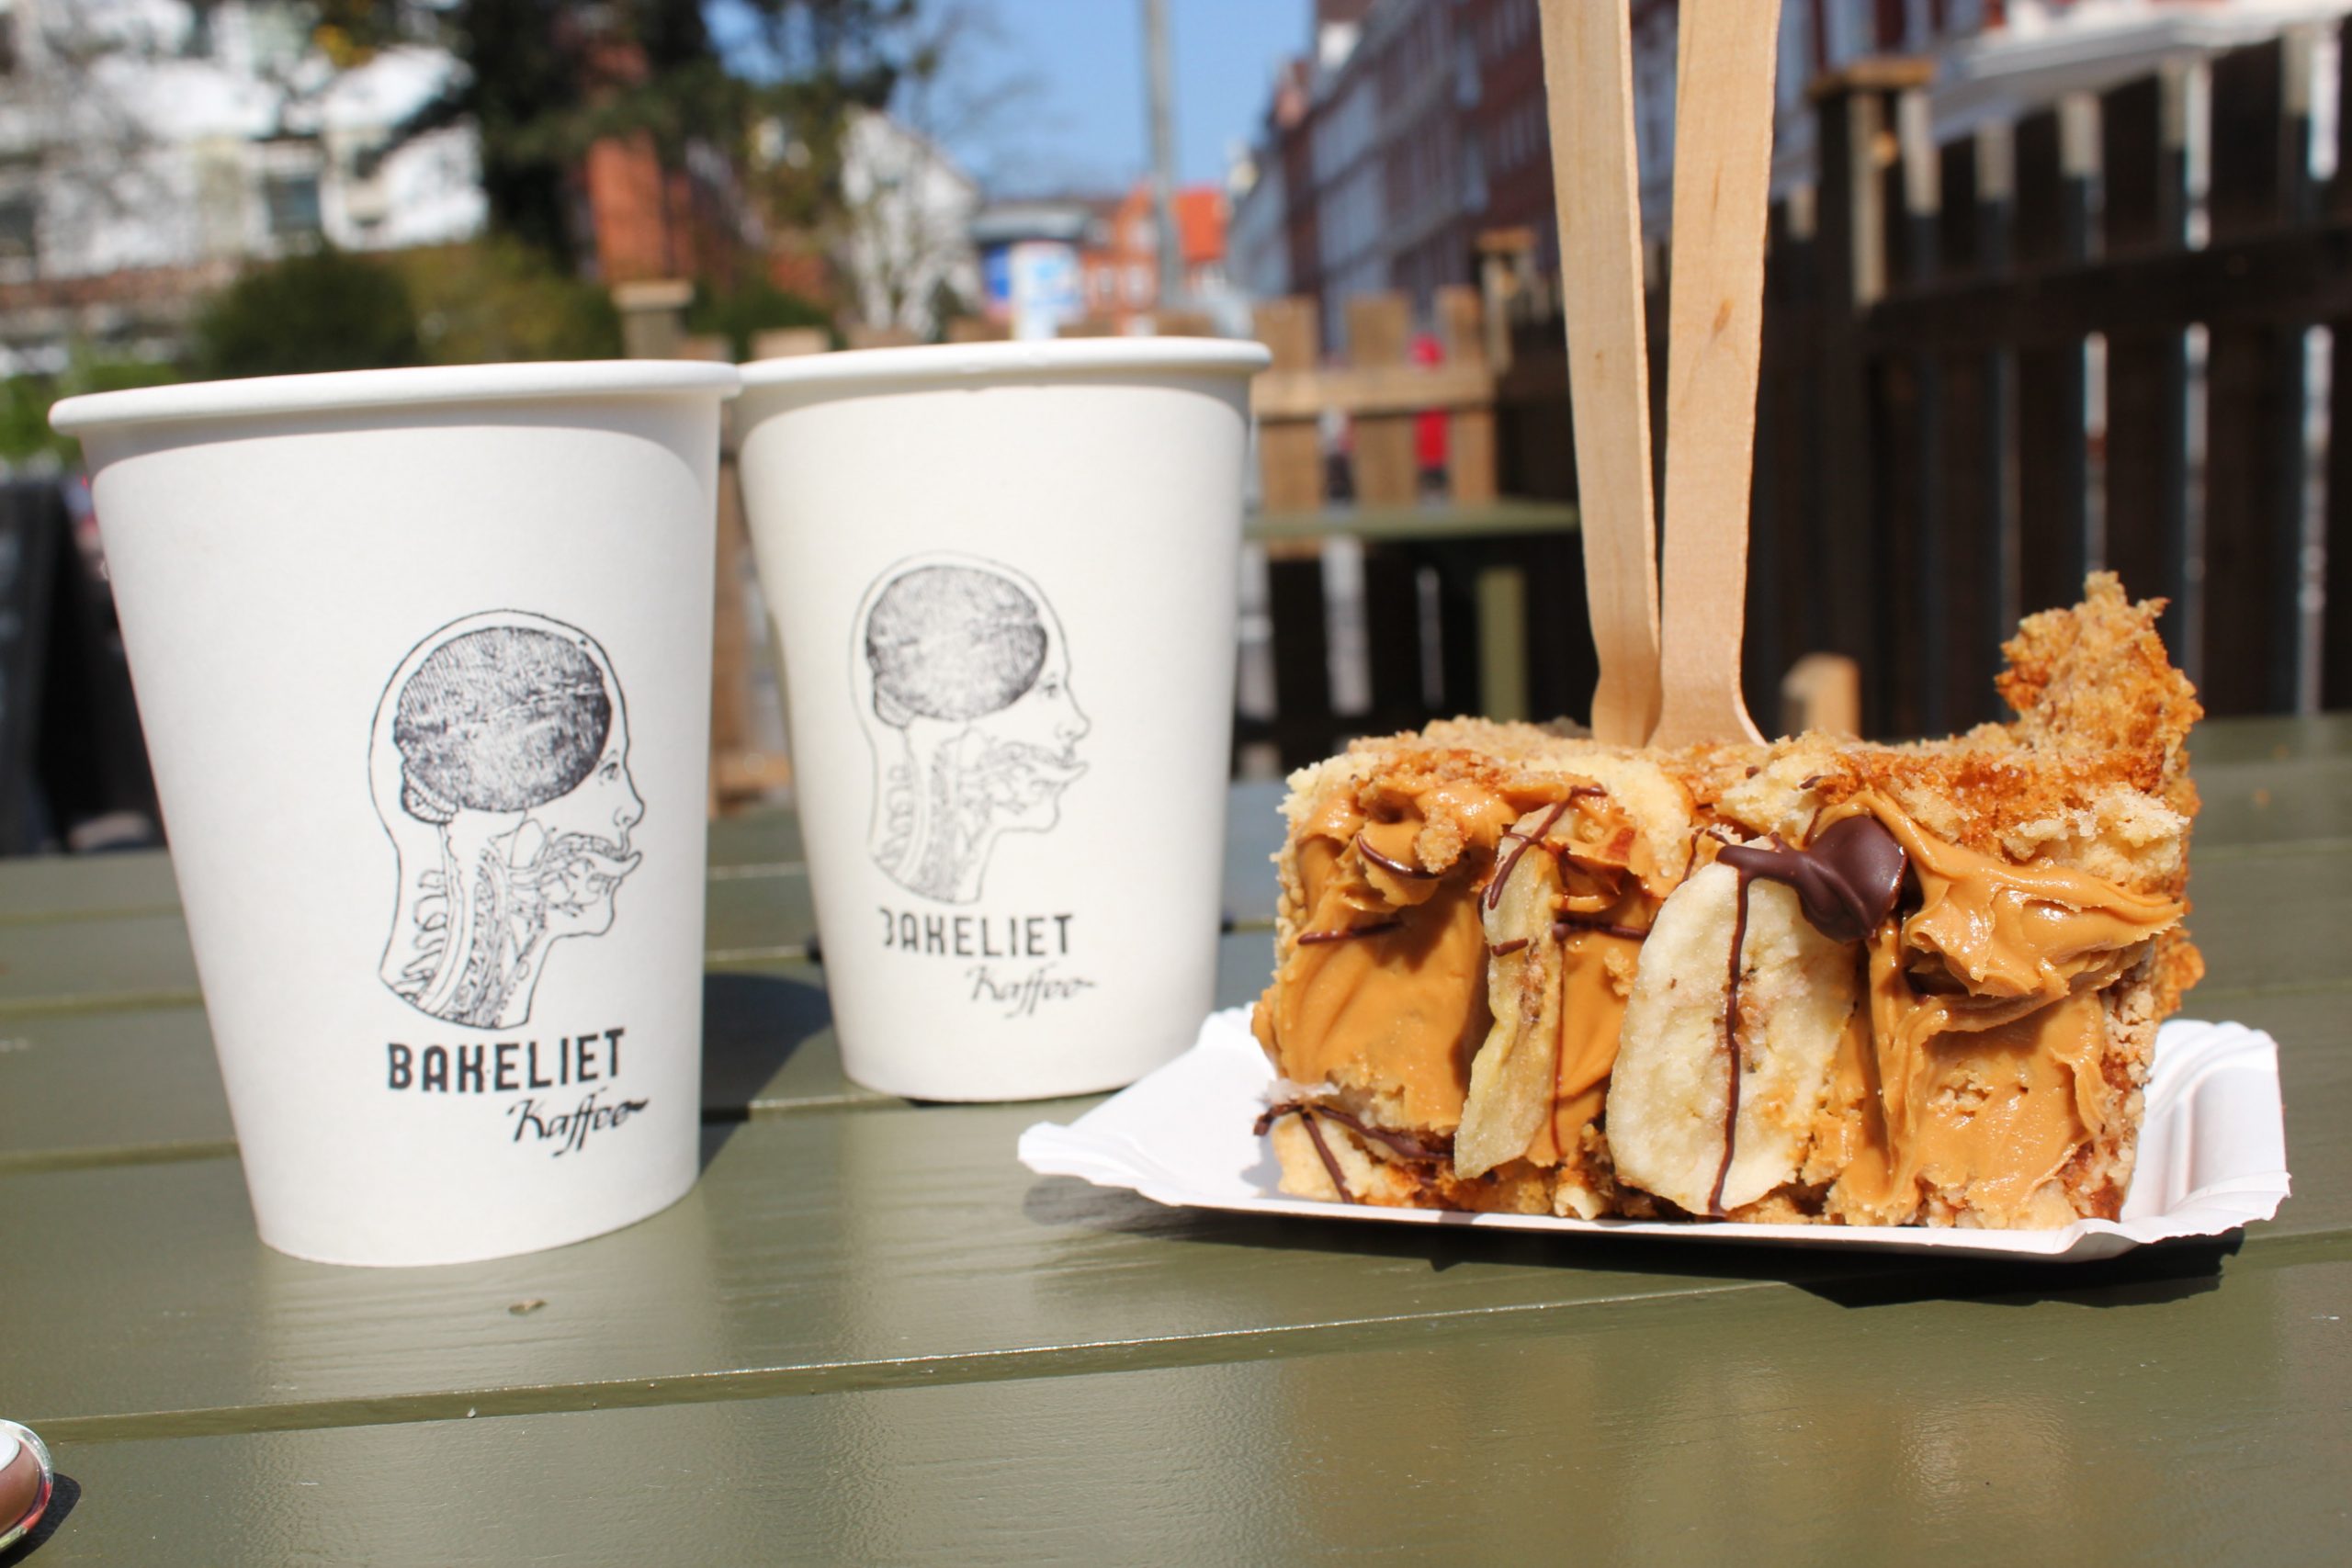 Picture of Bananabread and coffee of Bakaliet Café